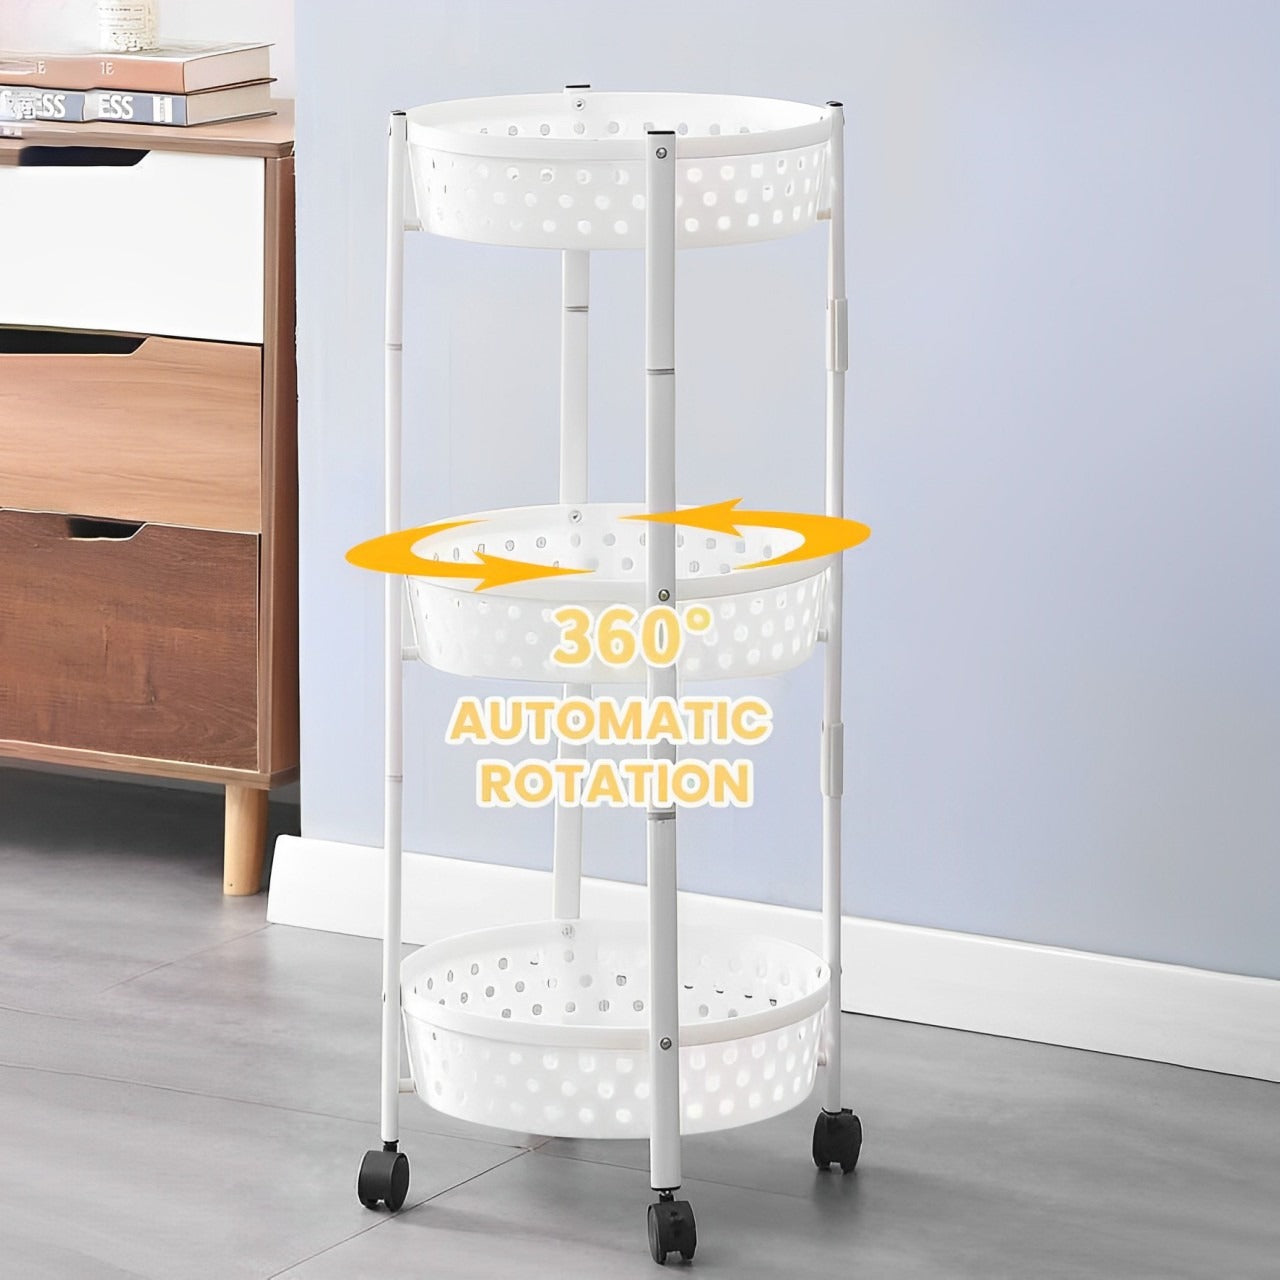 360 degree automatic rotation of 3 Layer Kitchen Trolley.